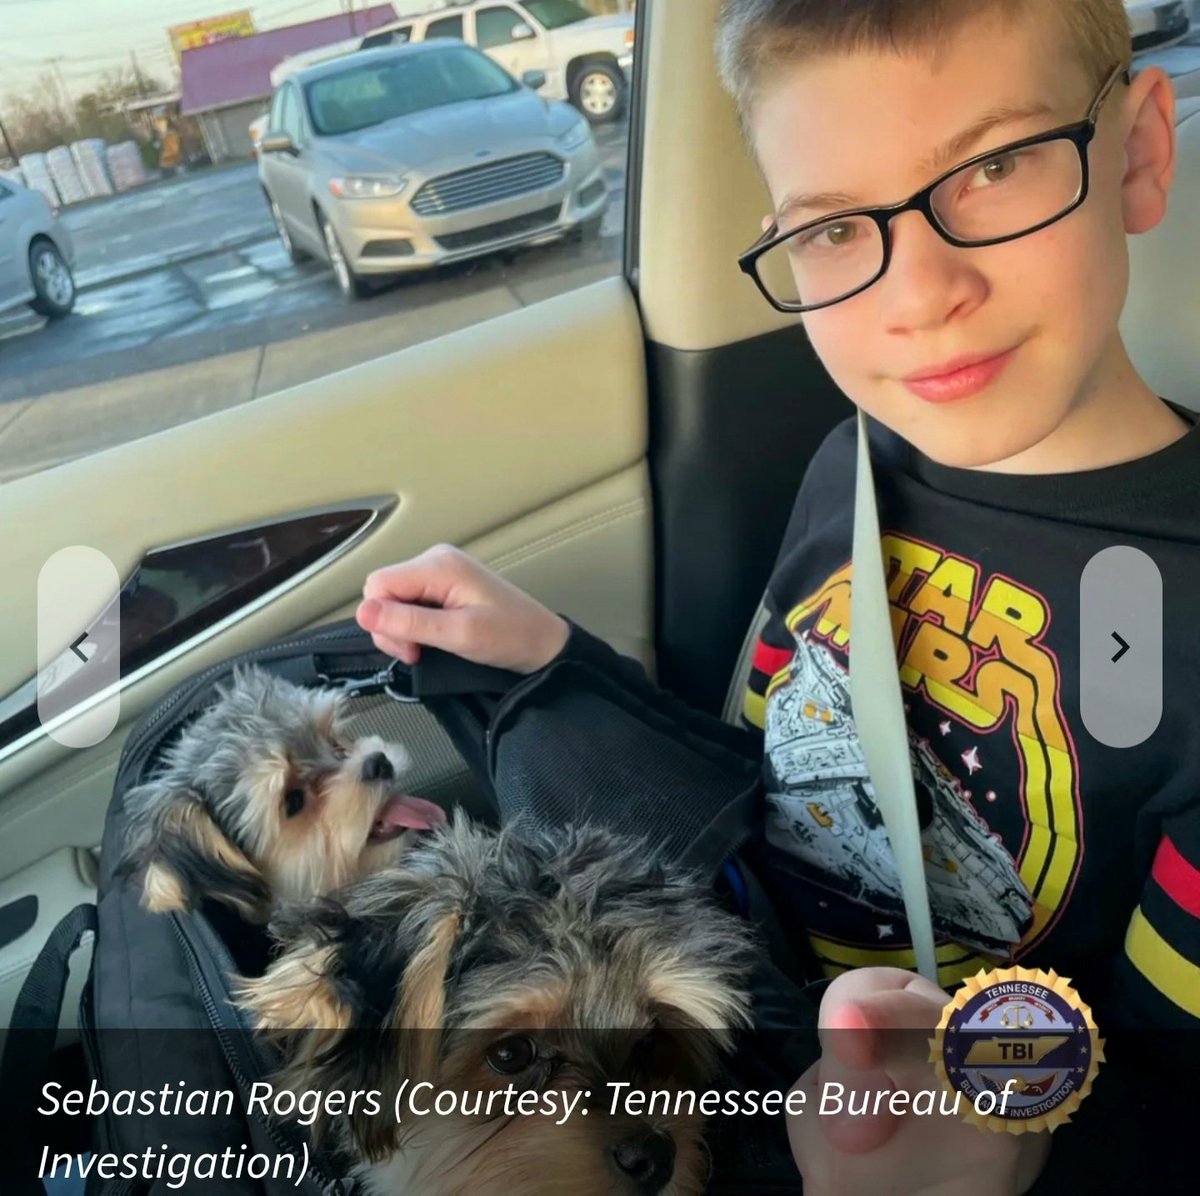 ❗#BOLO❗
#Tennessee #TN
AMBER Alert for #SebastianRogers
Officials searching #Kentucky landfill

A Kentucky State Police spokesperson, Ridge Porter, said detectives obtained a search warrant for the landfill located in #WhitePlains, #KY

wkrn.com/news/local-new…